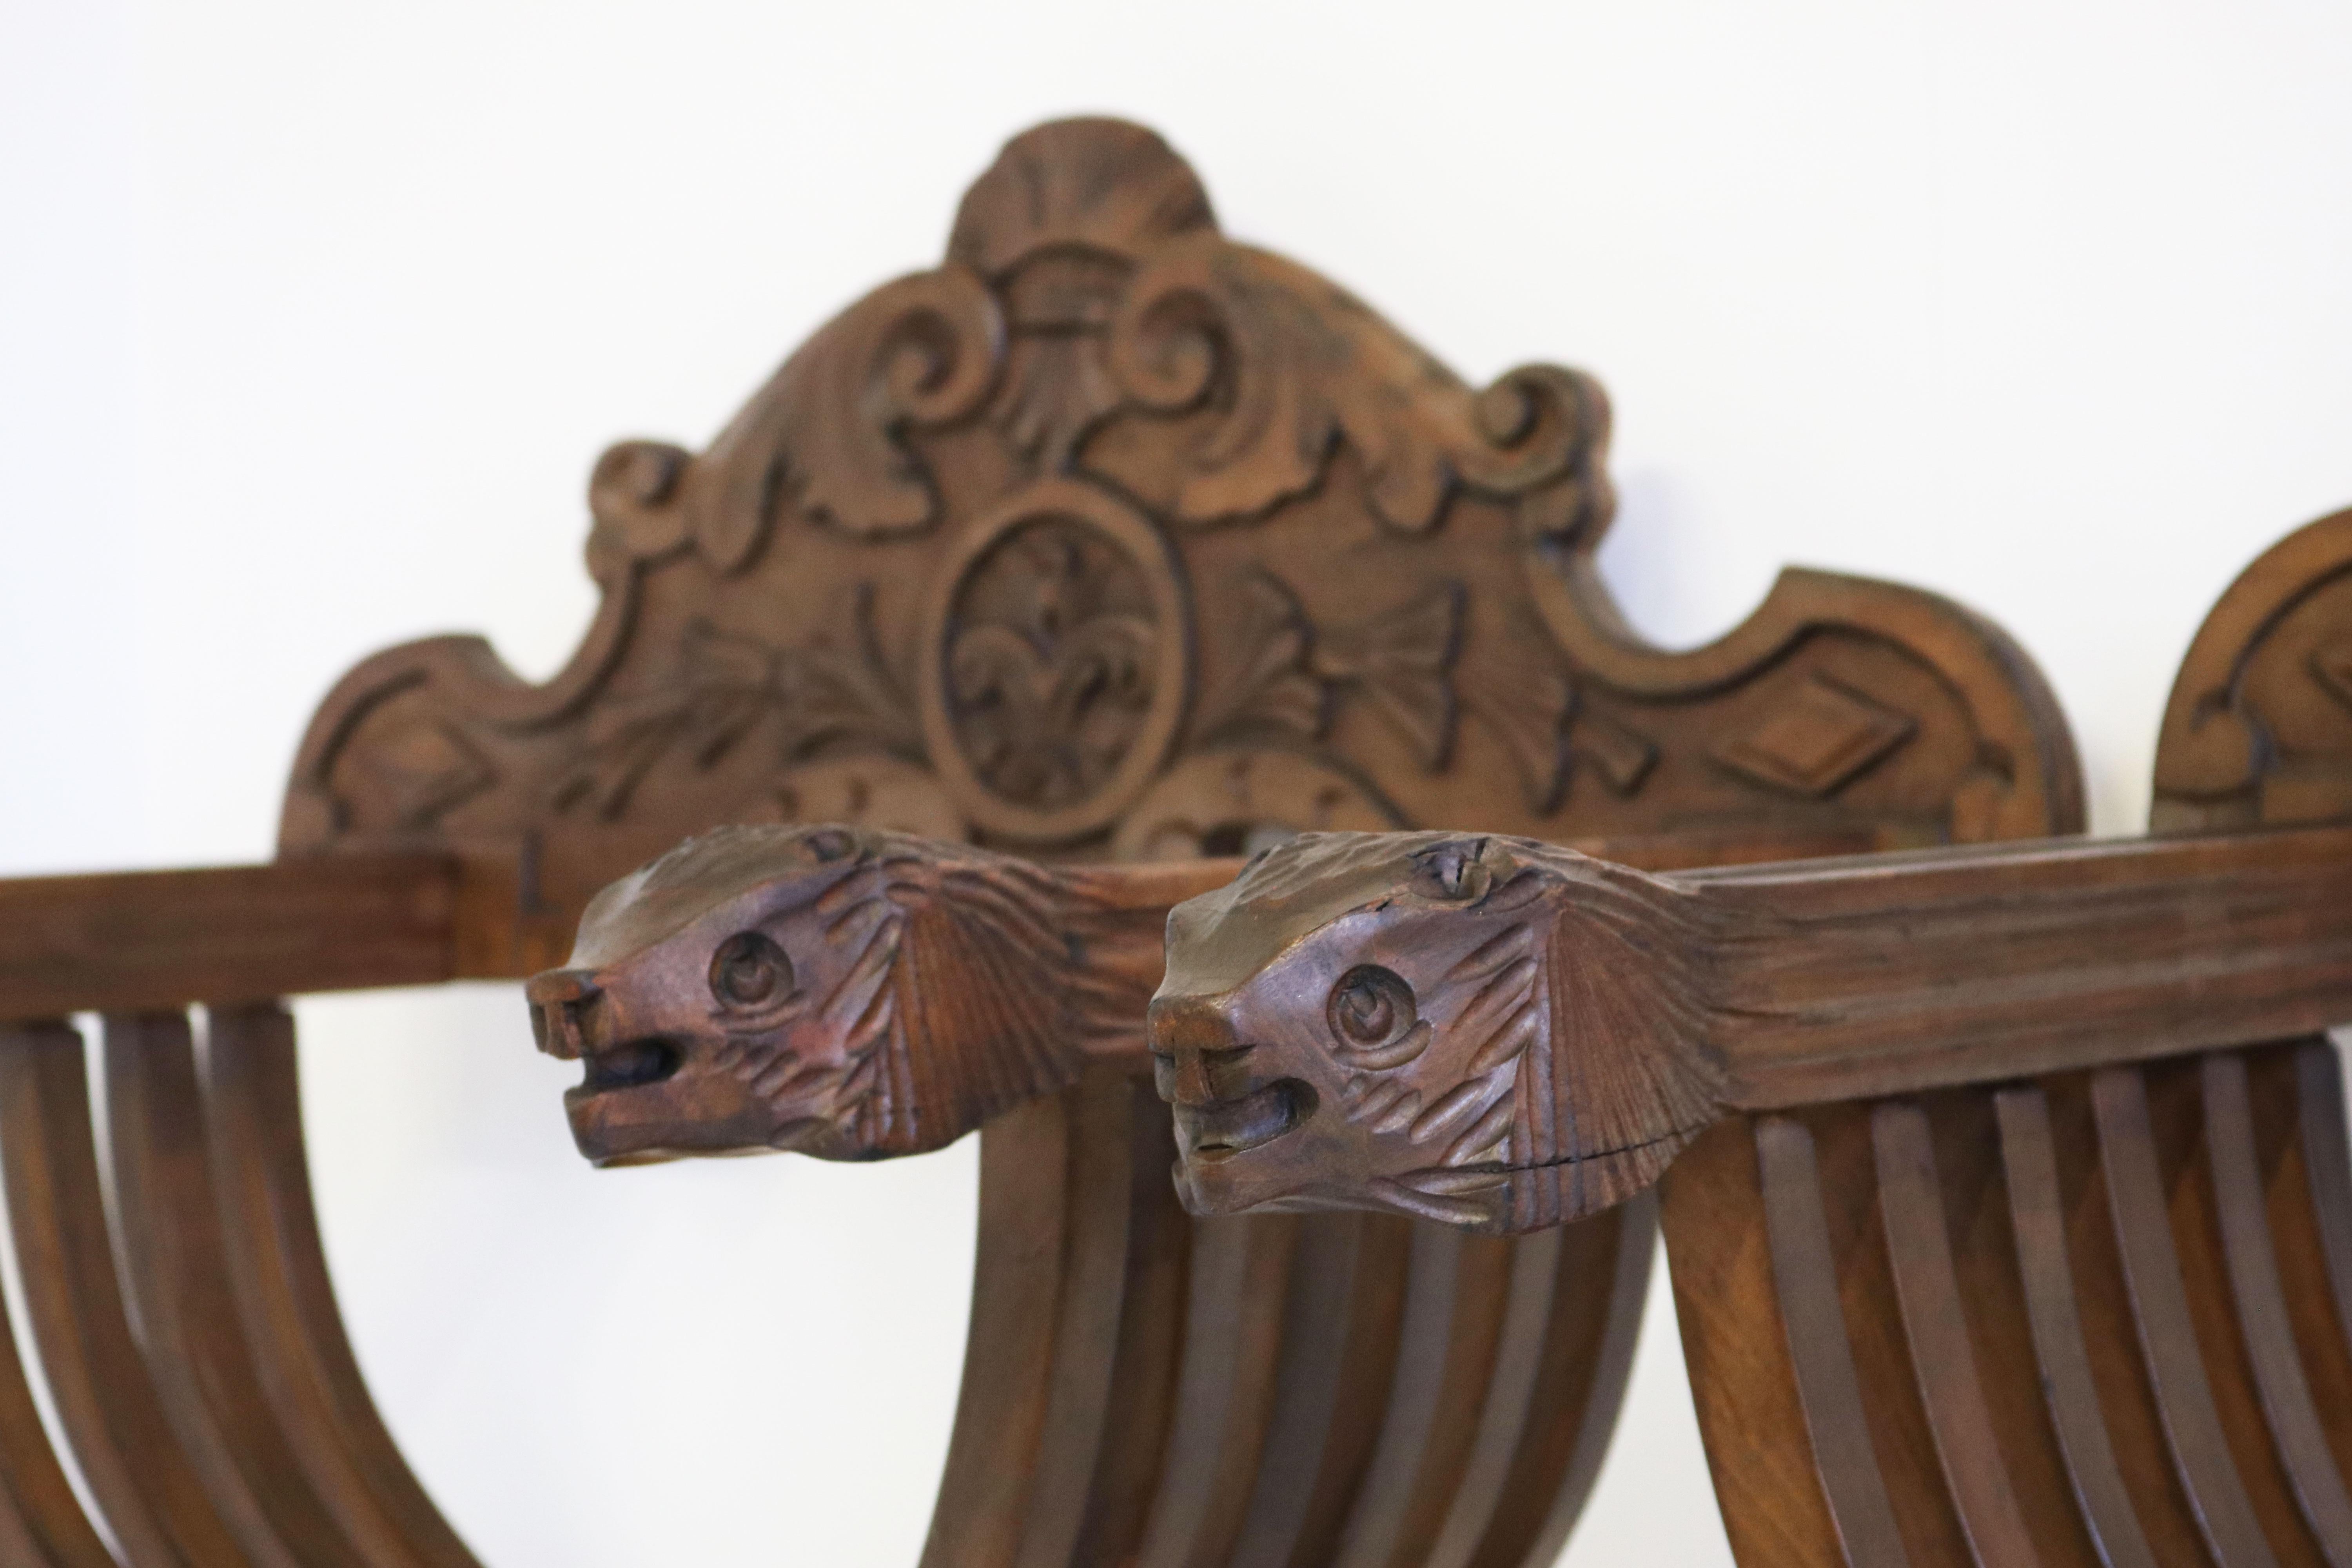 Impressive & fully original pair of Florentine Renaissance Savonarola chairs in carved birch.
Armrests ending with two amazing hand-carved lion heads. The lion heads where used to display the power/might of the one who used the chair. The backrest